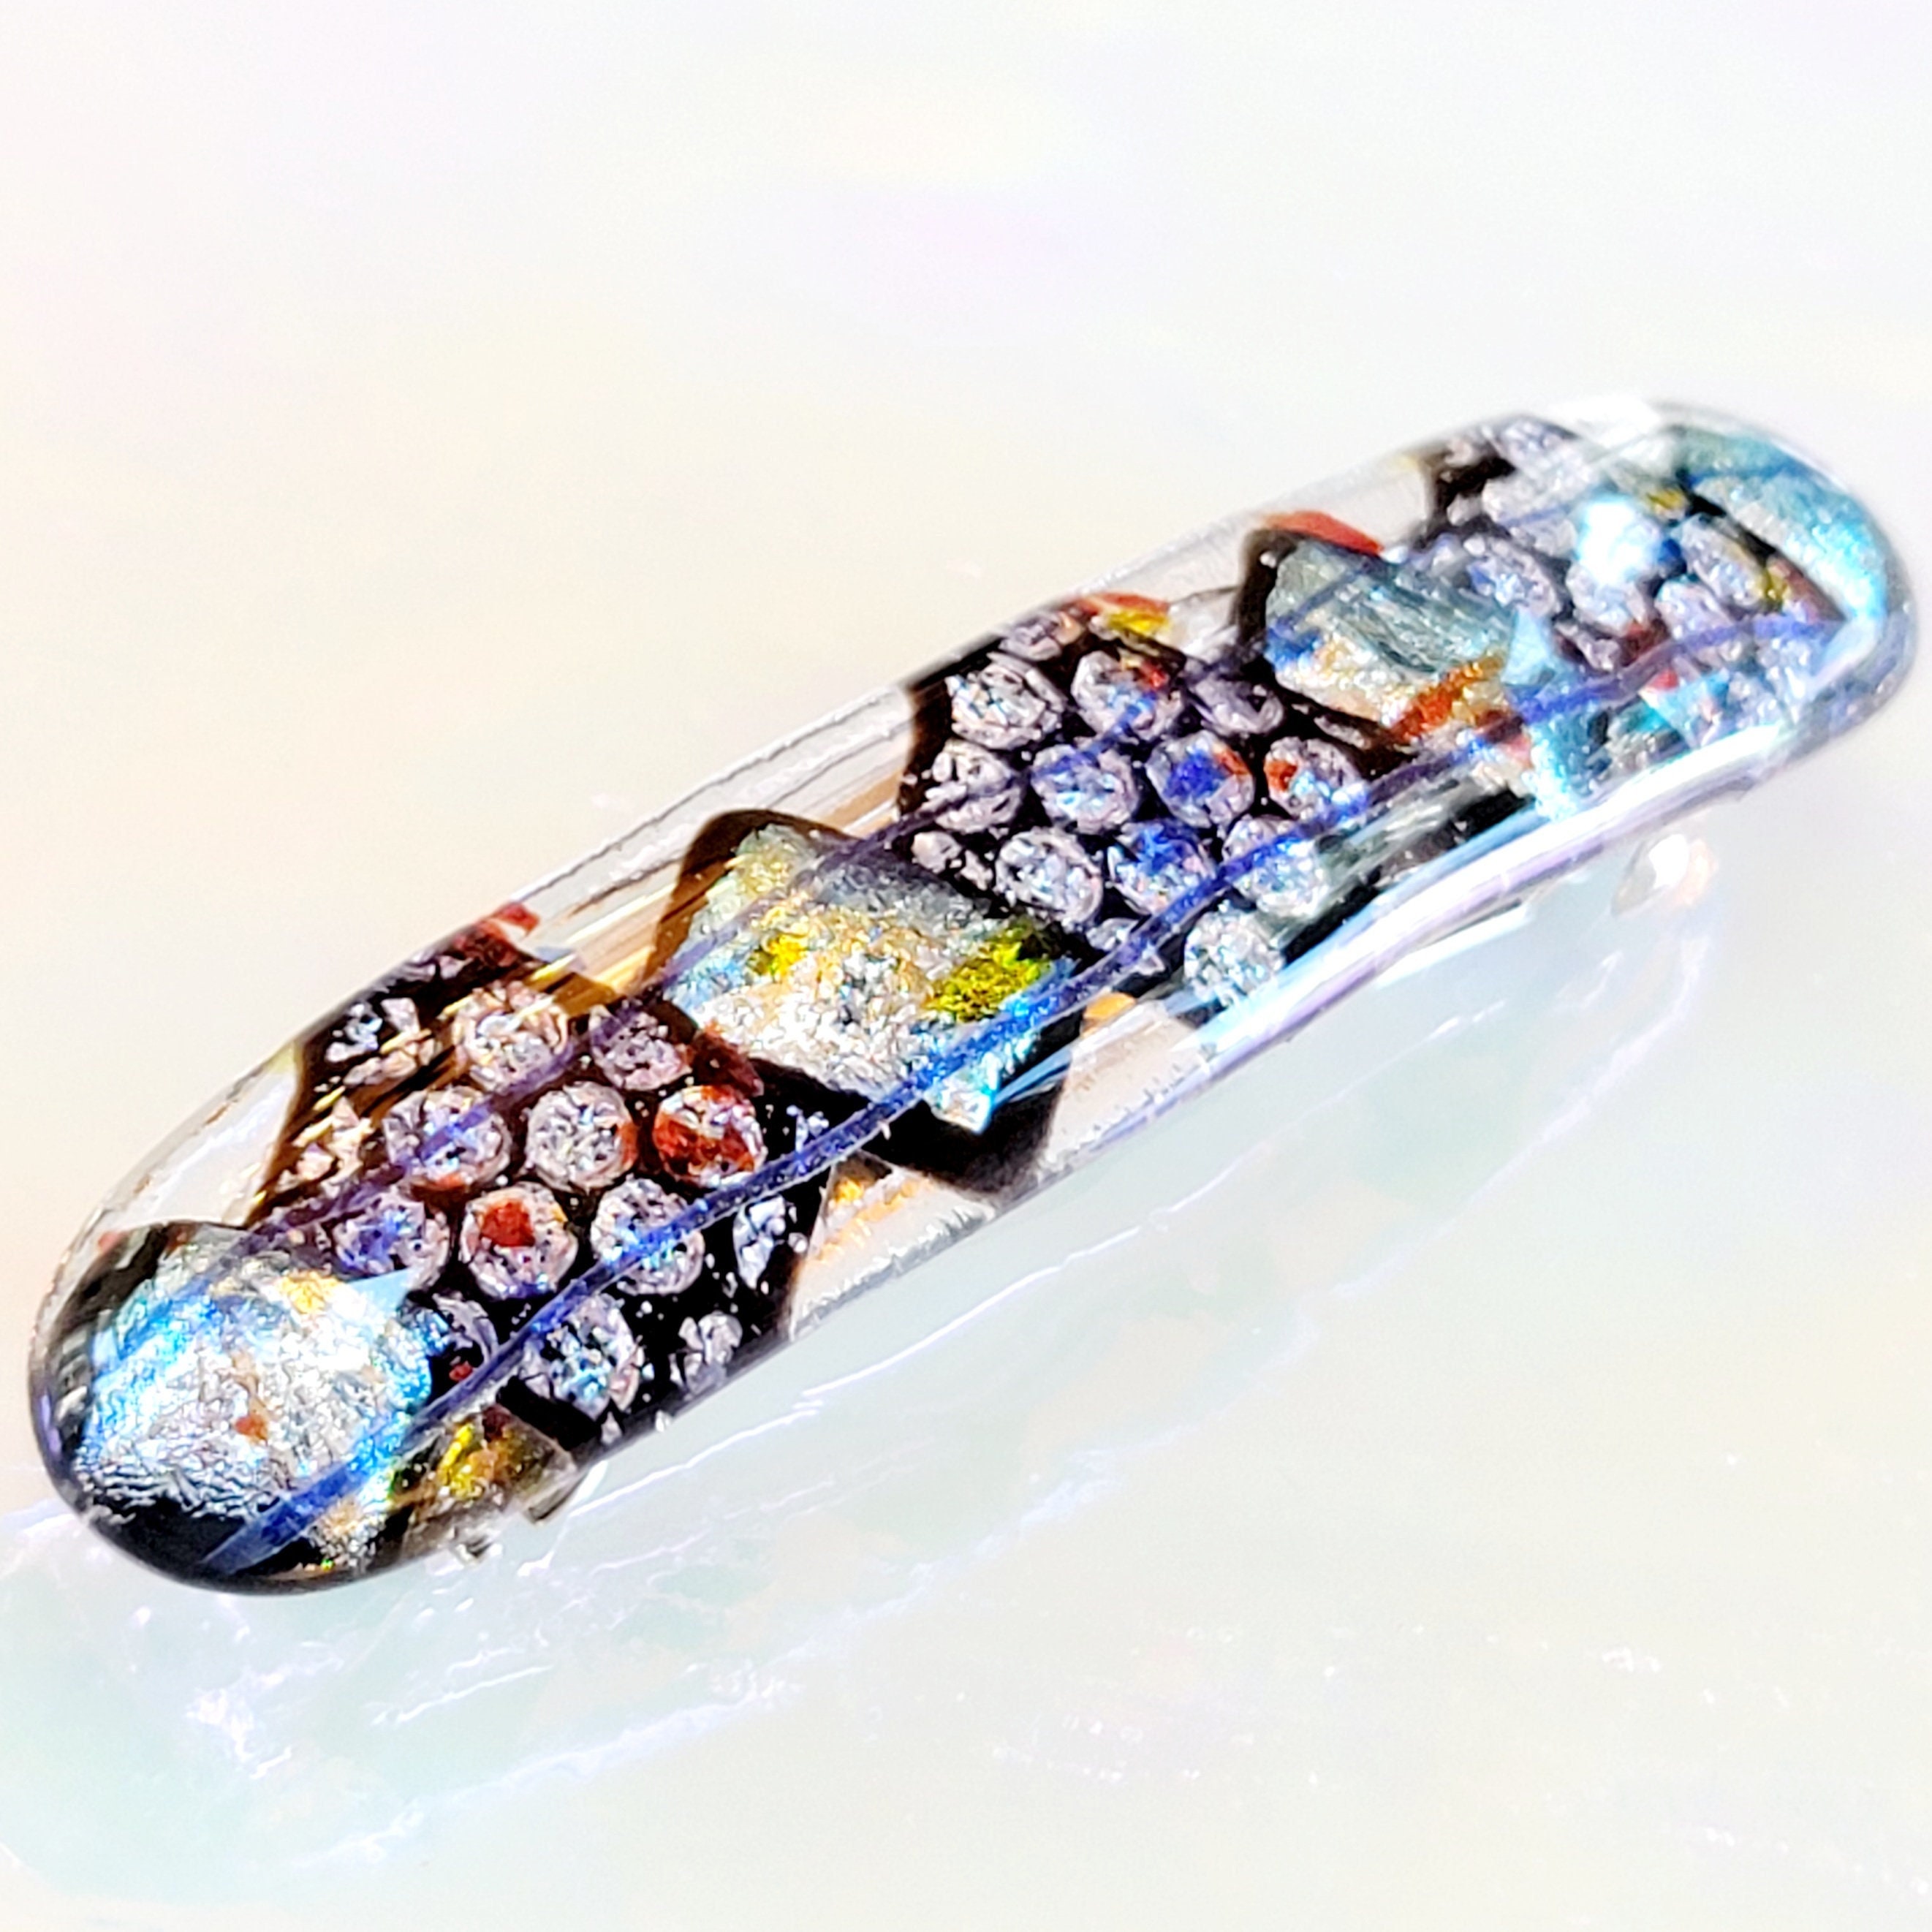 MEDIUM to slightly THICK pony pretty shimmery silver with touches of pink dichroic fused glass hair barrette   Sky Forest Art Glass